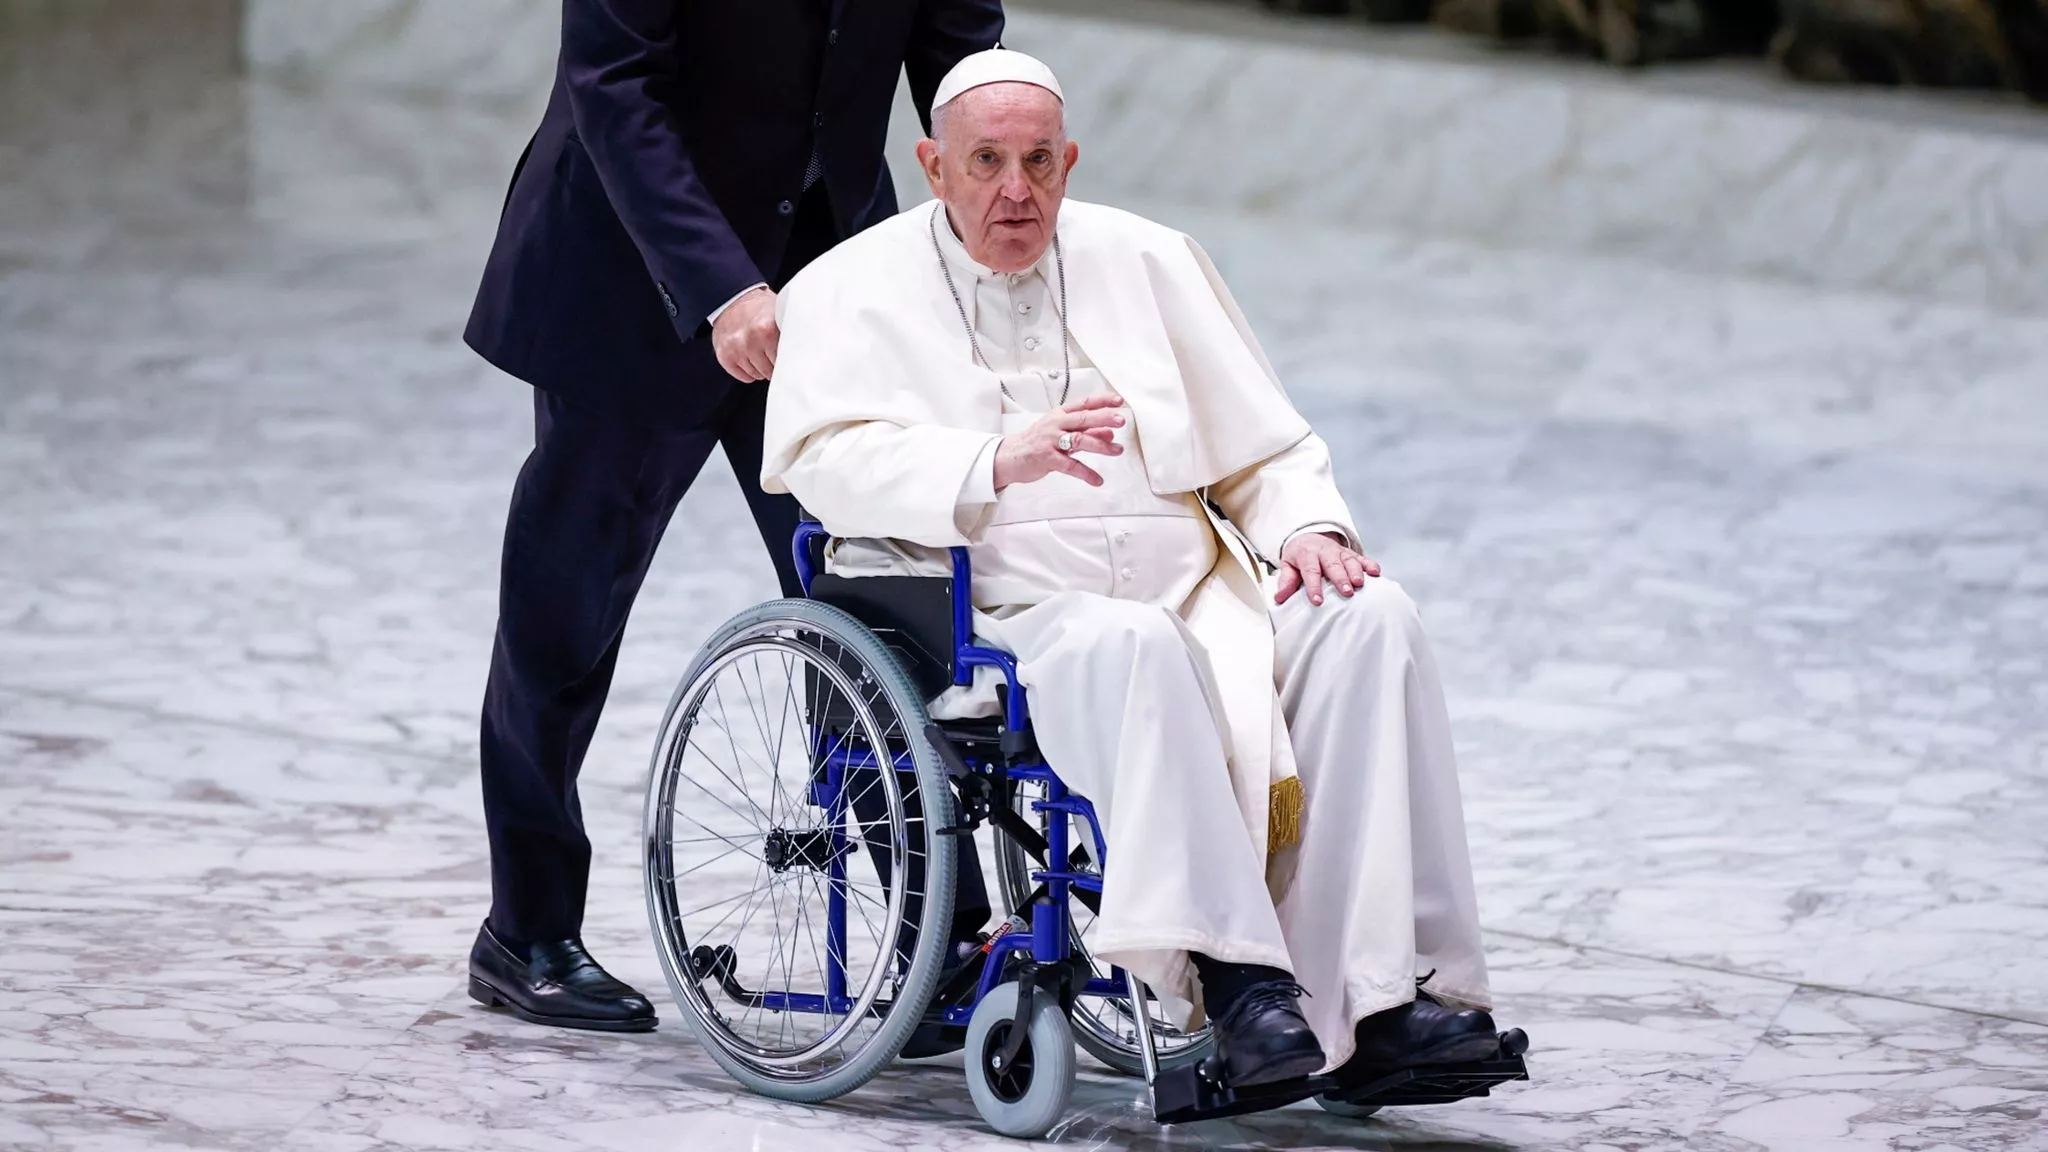 Why Is The Pope In A Wheelchair